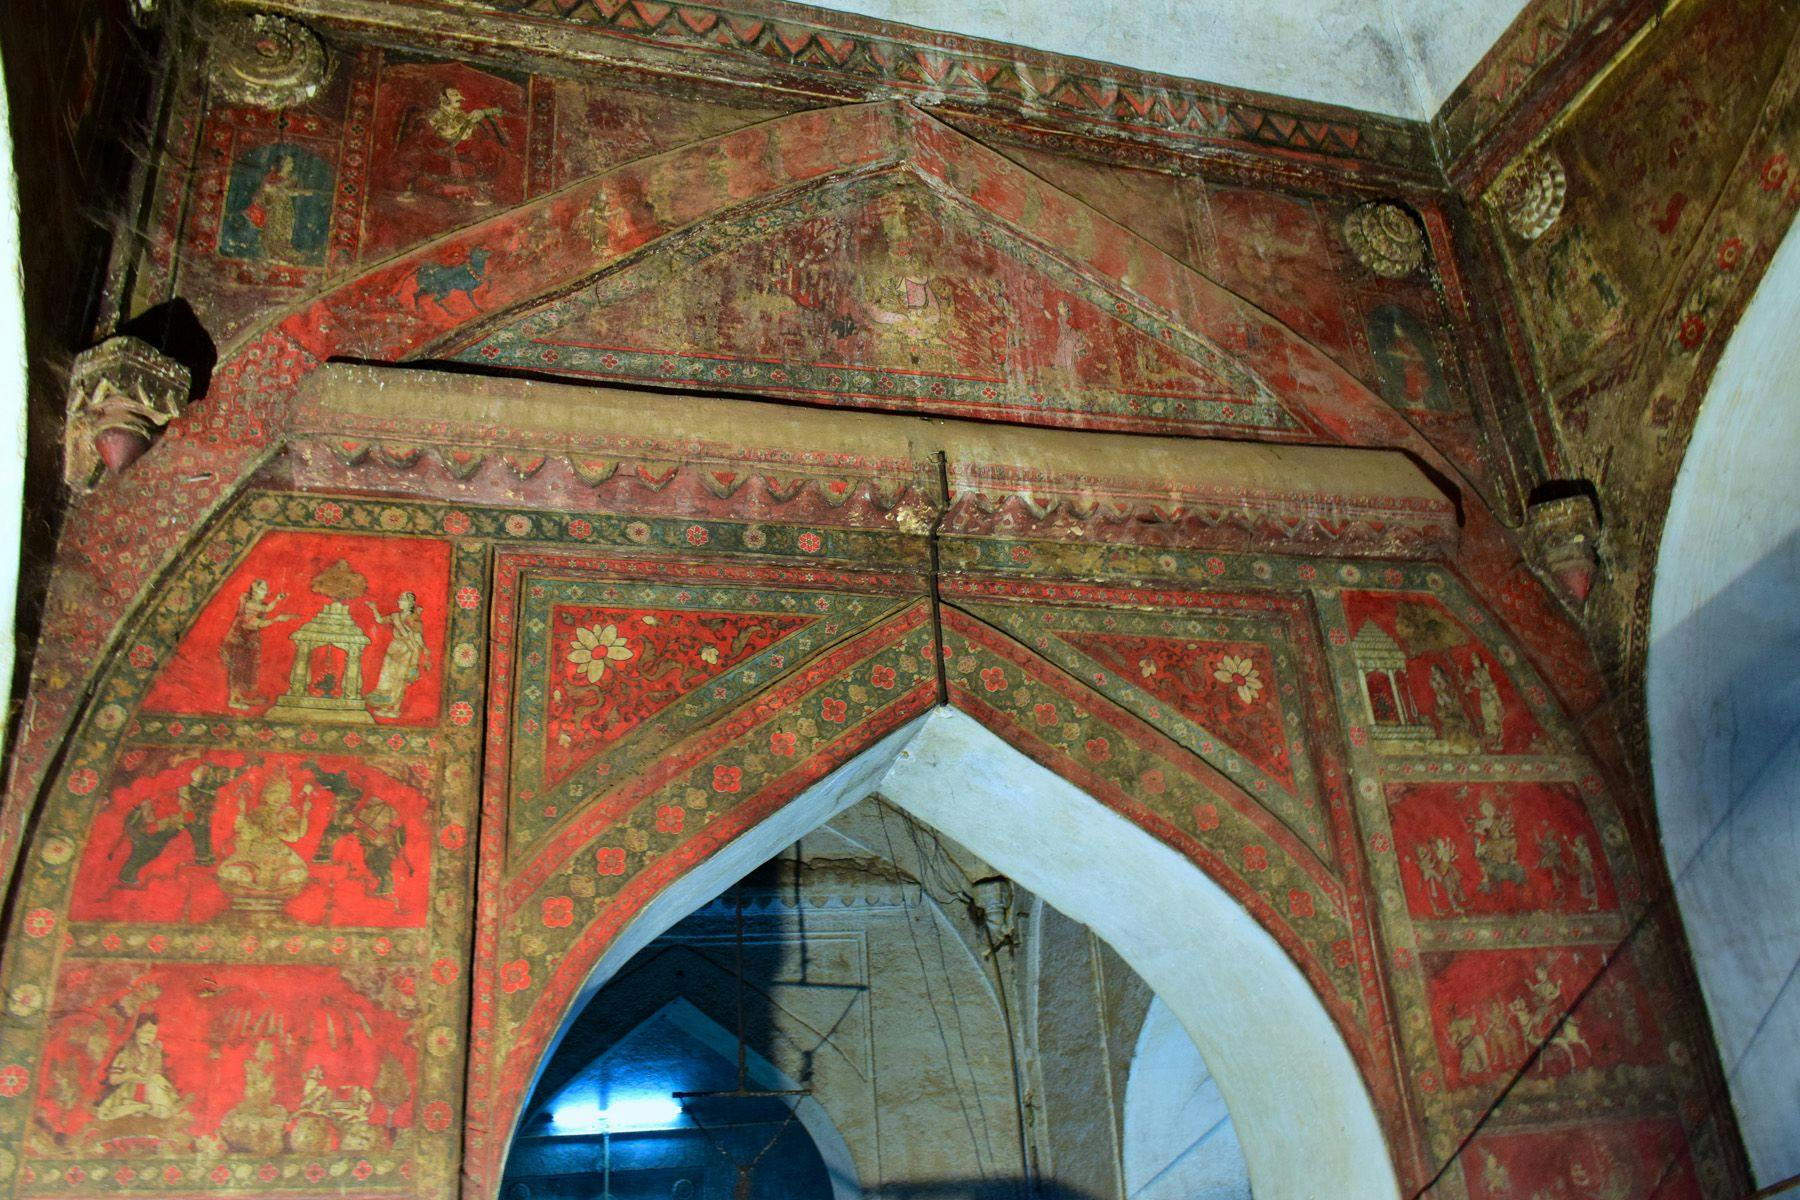 Paintings inside the temple